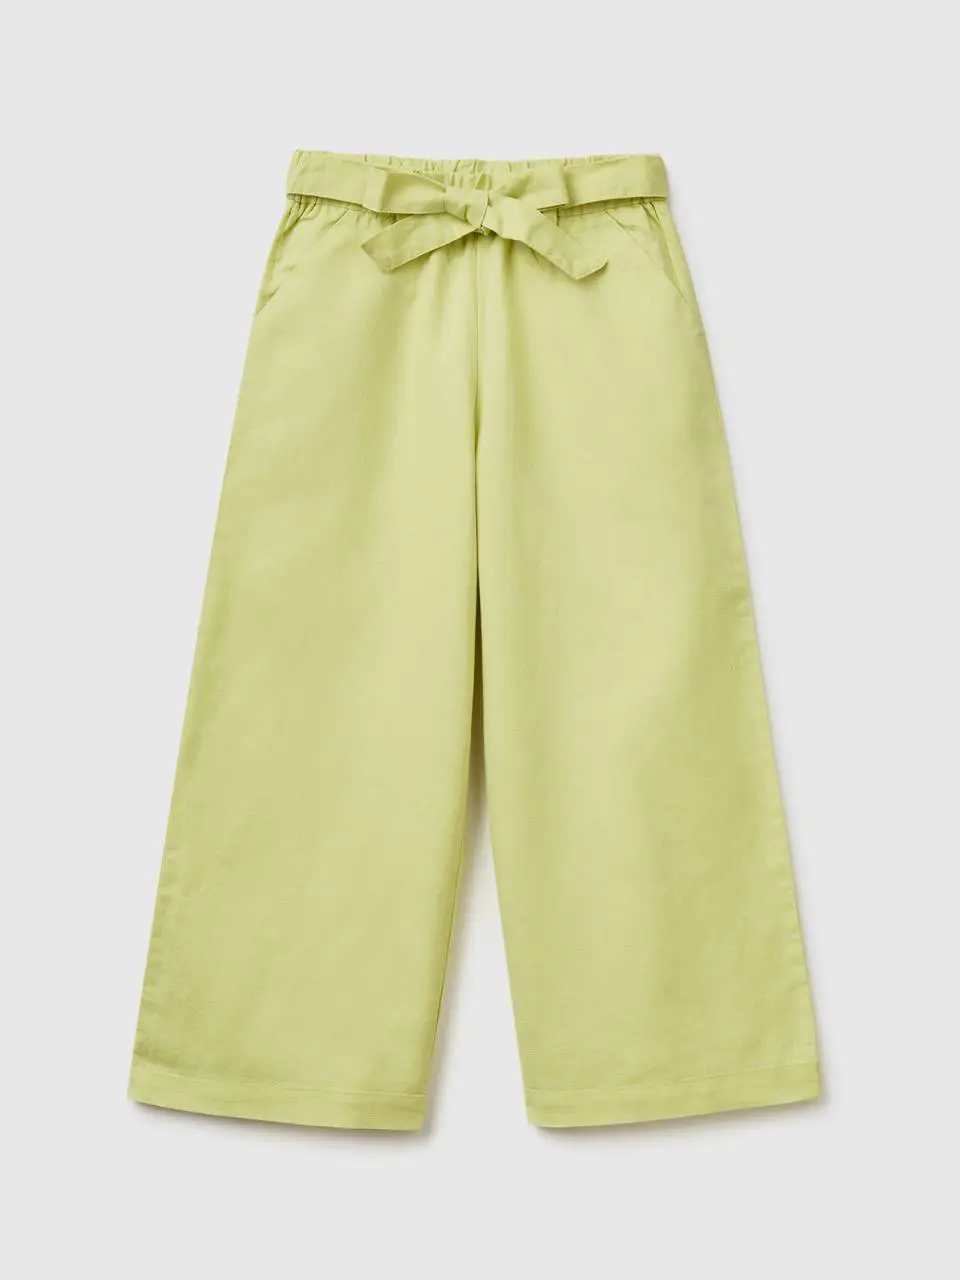 Benetton palazzo trousers in linen blend. 1